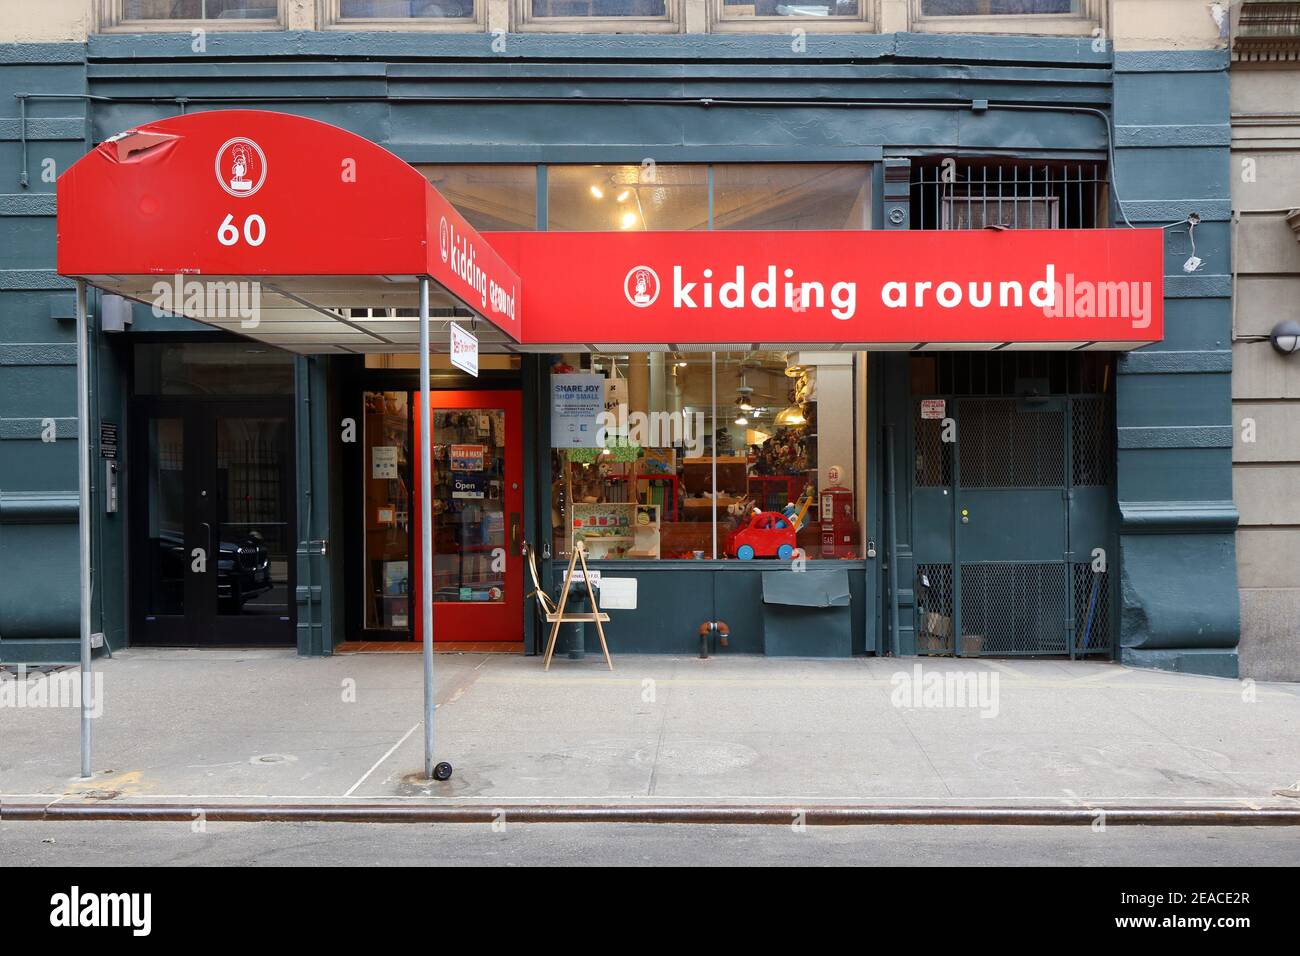 Kidding Around, 60 W. 15th St, New York, NYC storefront photo of an educational toy store in Manhattan's Chelsea neighborhood. Stock Photo